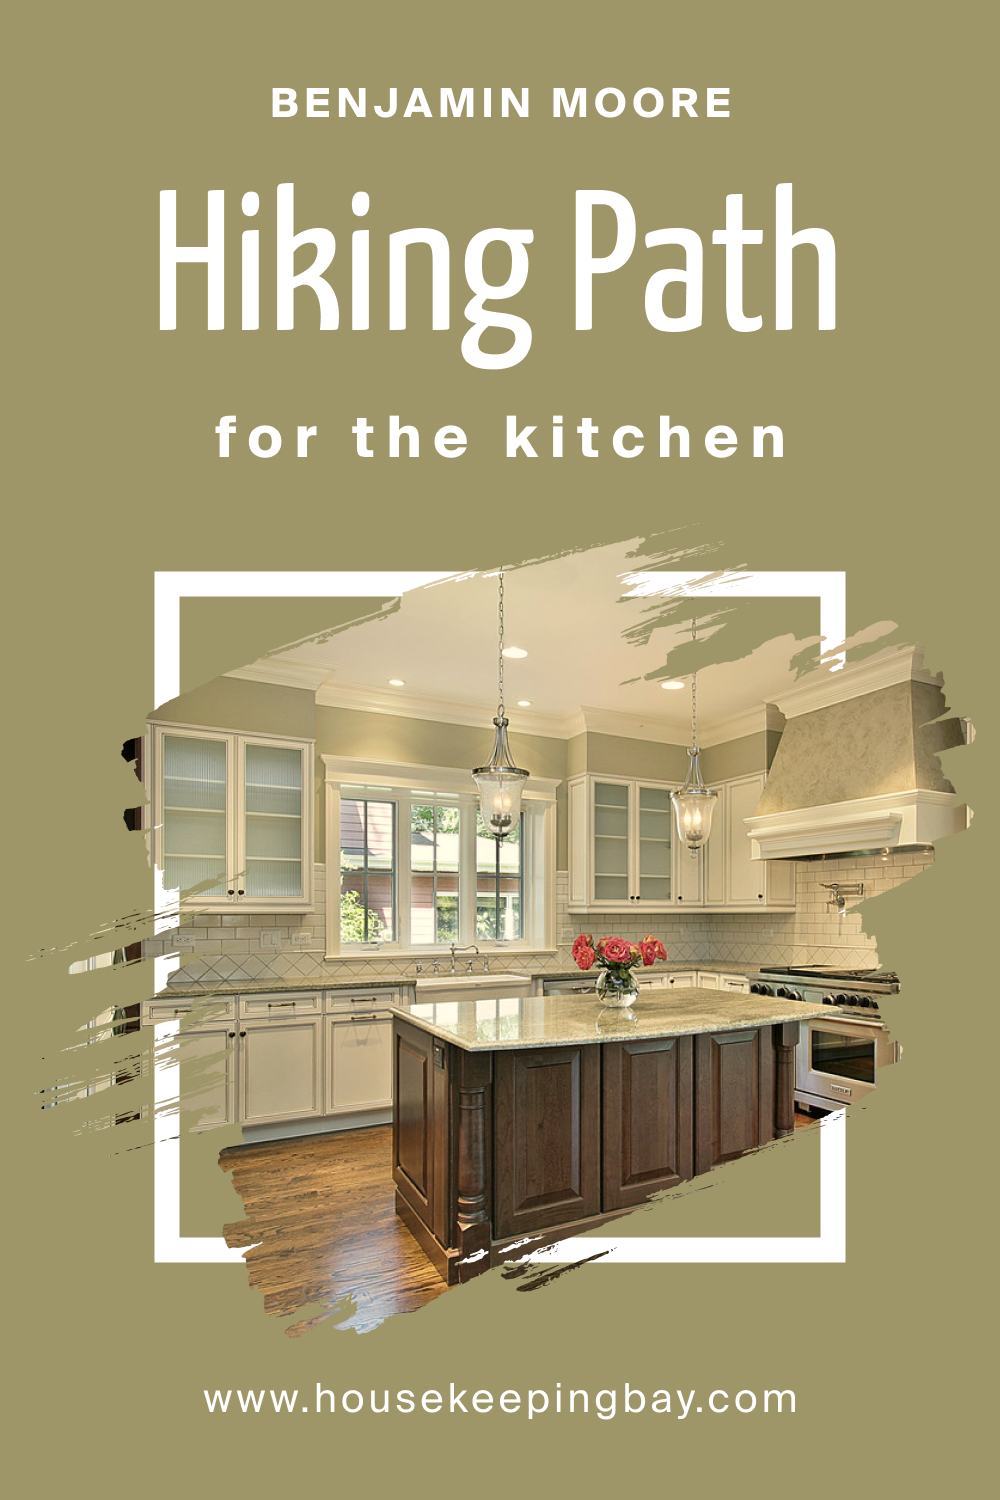 How to Use BM Hiking Path 524 in the Kitchen?